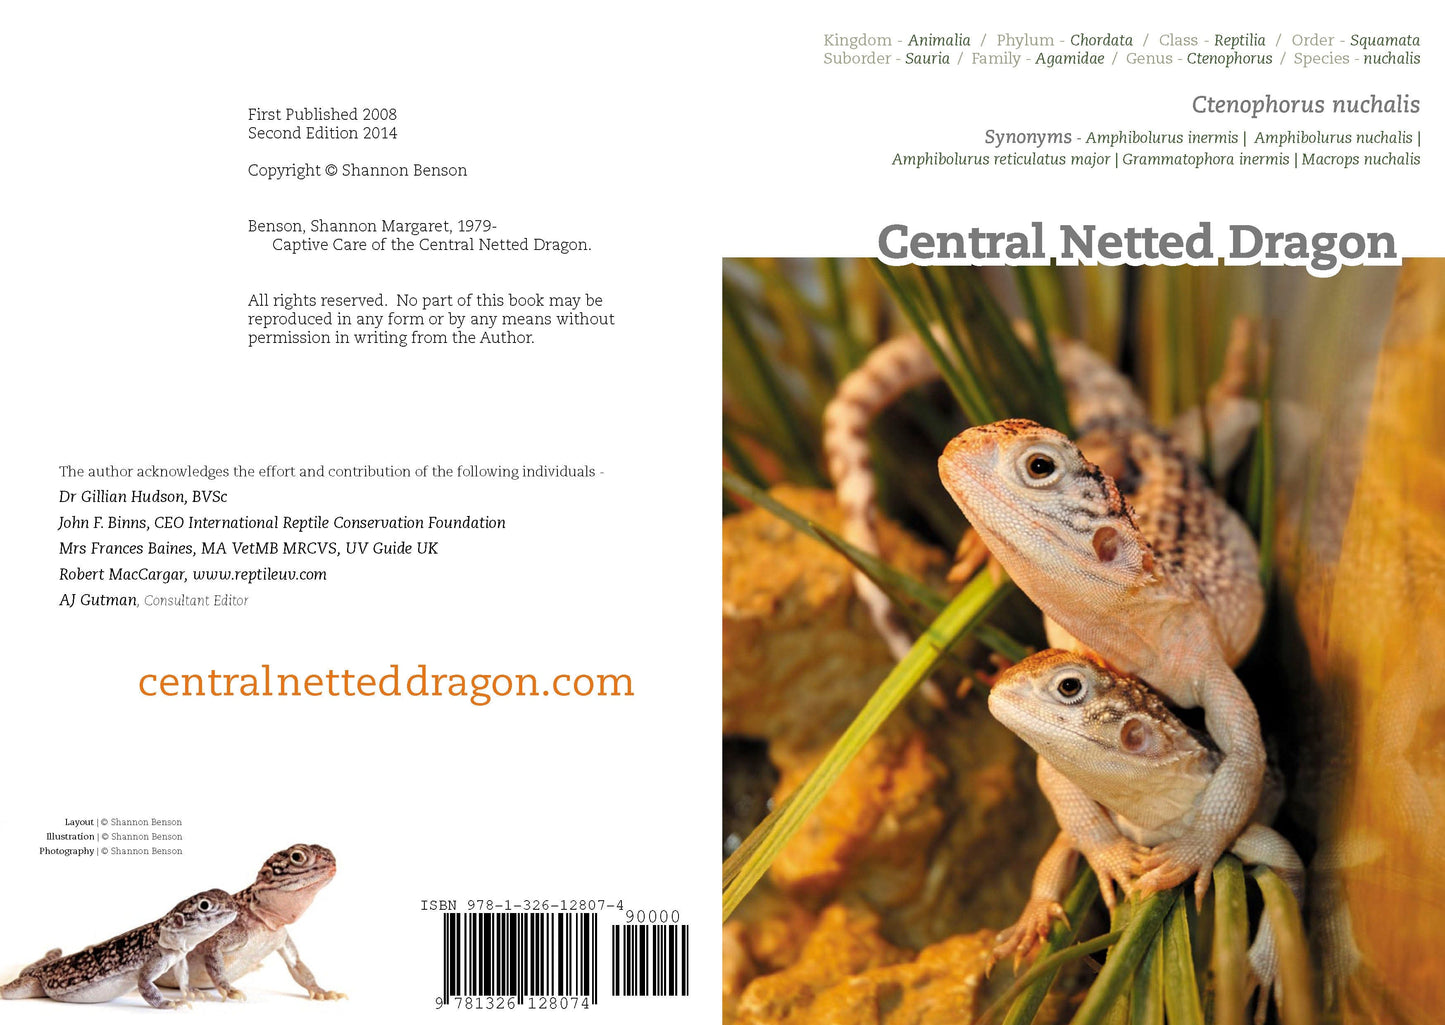 Captive Care of the Central Netted Dragon